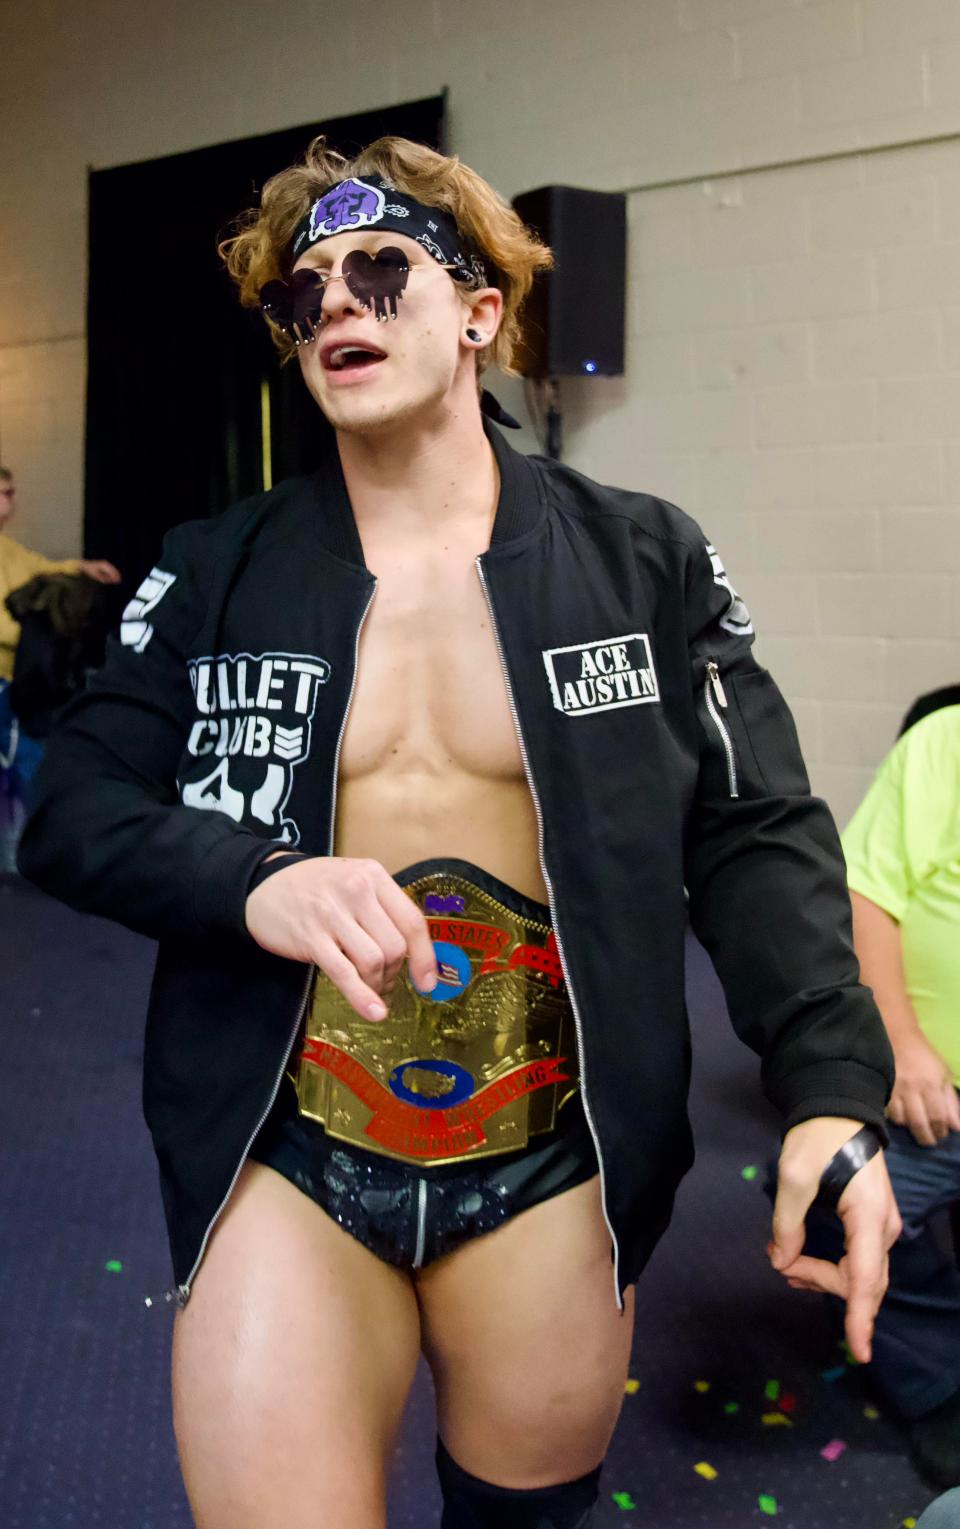 TNA Superstar and IWR United States Champion Ace Austin makes his way to the ring at IWR 24-The Fall Brawl.